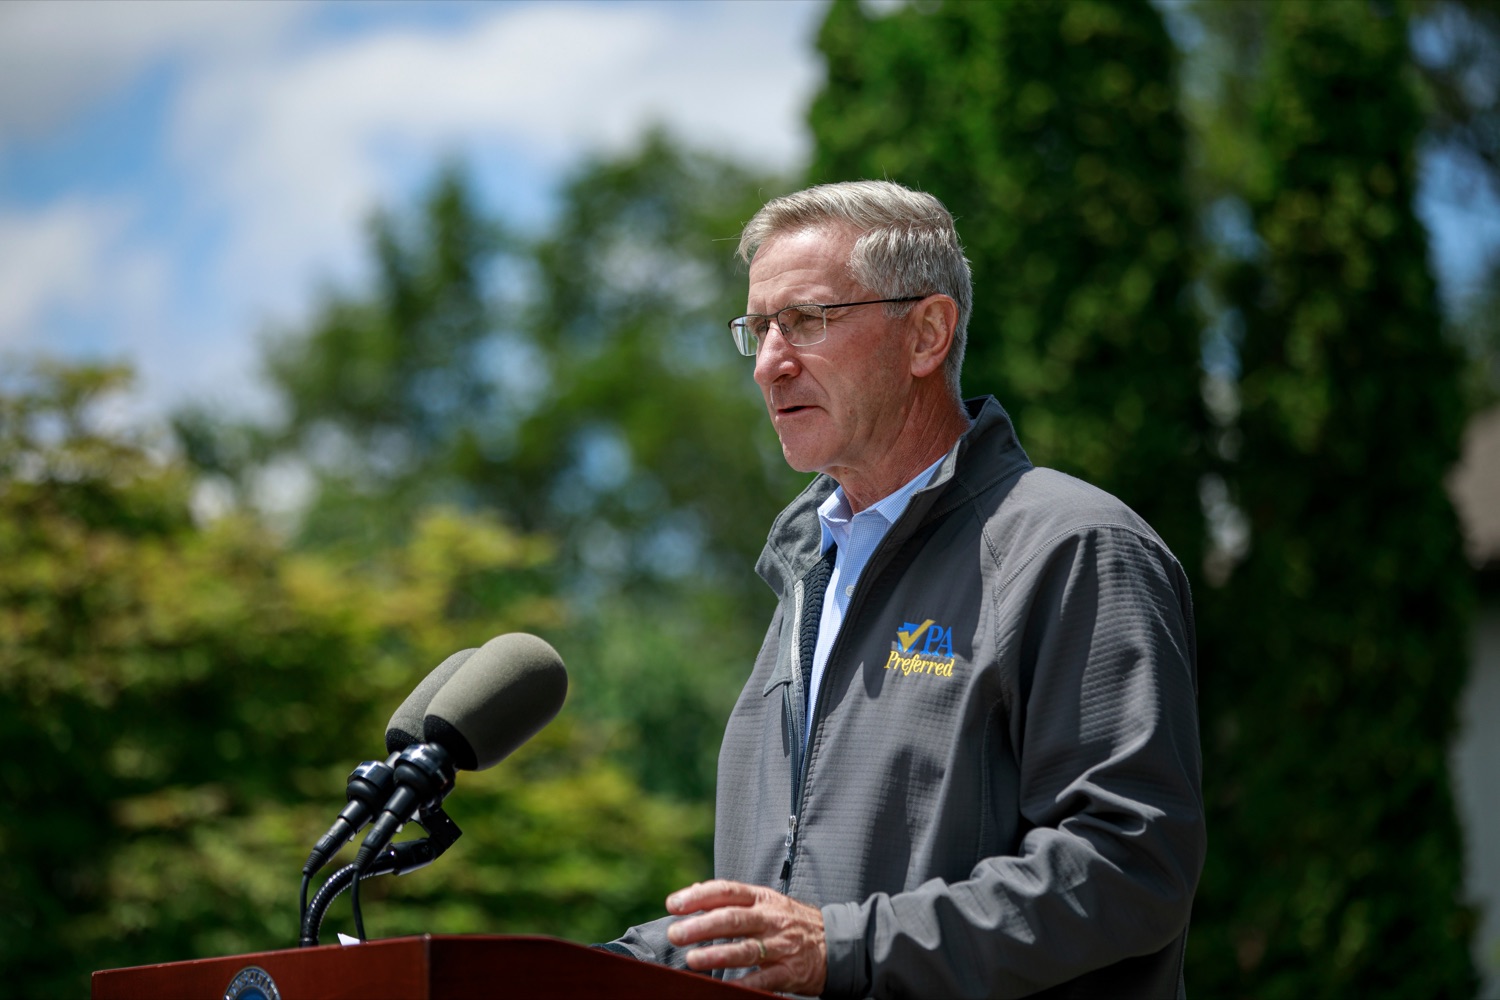 Dept. of Agriculture Secretary Russell Redding speaks during a press conference, which provided an update on the state of spotted lanternfly in Pennsylvania and the path to beating this invasive specie, at Eichenlaub Inc. in Allegheny County, on Tuesday, June 22, 2021.<br><a href="https://filesource.amperwave.net/commonwealthofpa/photo/18842_AGRIC_SLF_NK_017.jpg" target="_blank">⇣ Download Photo</a>